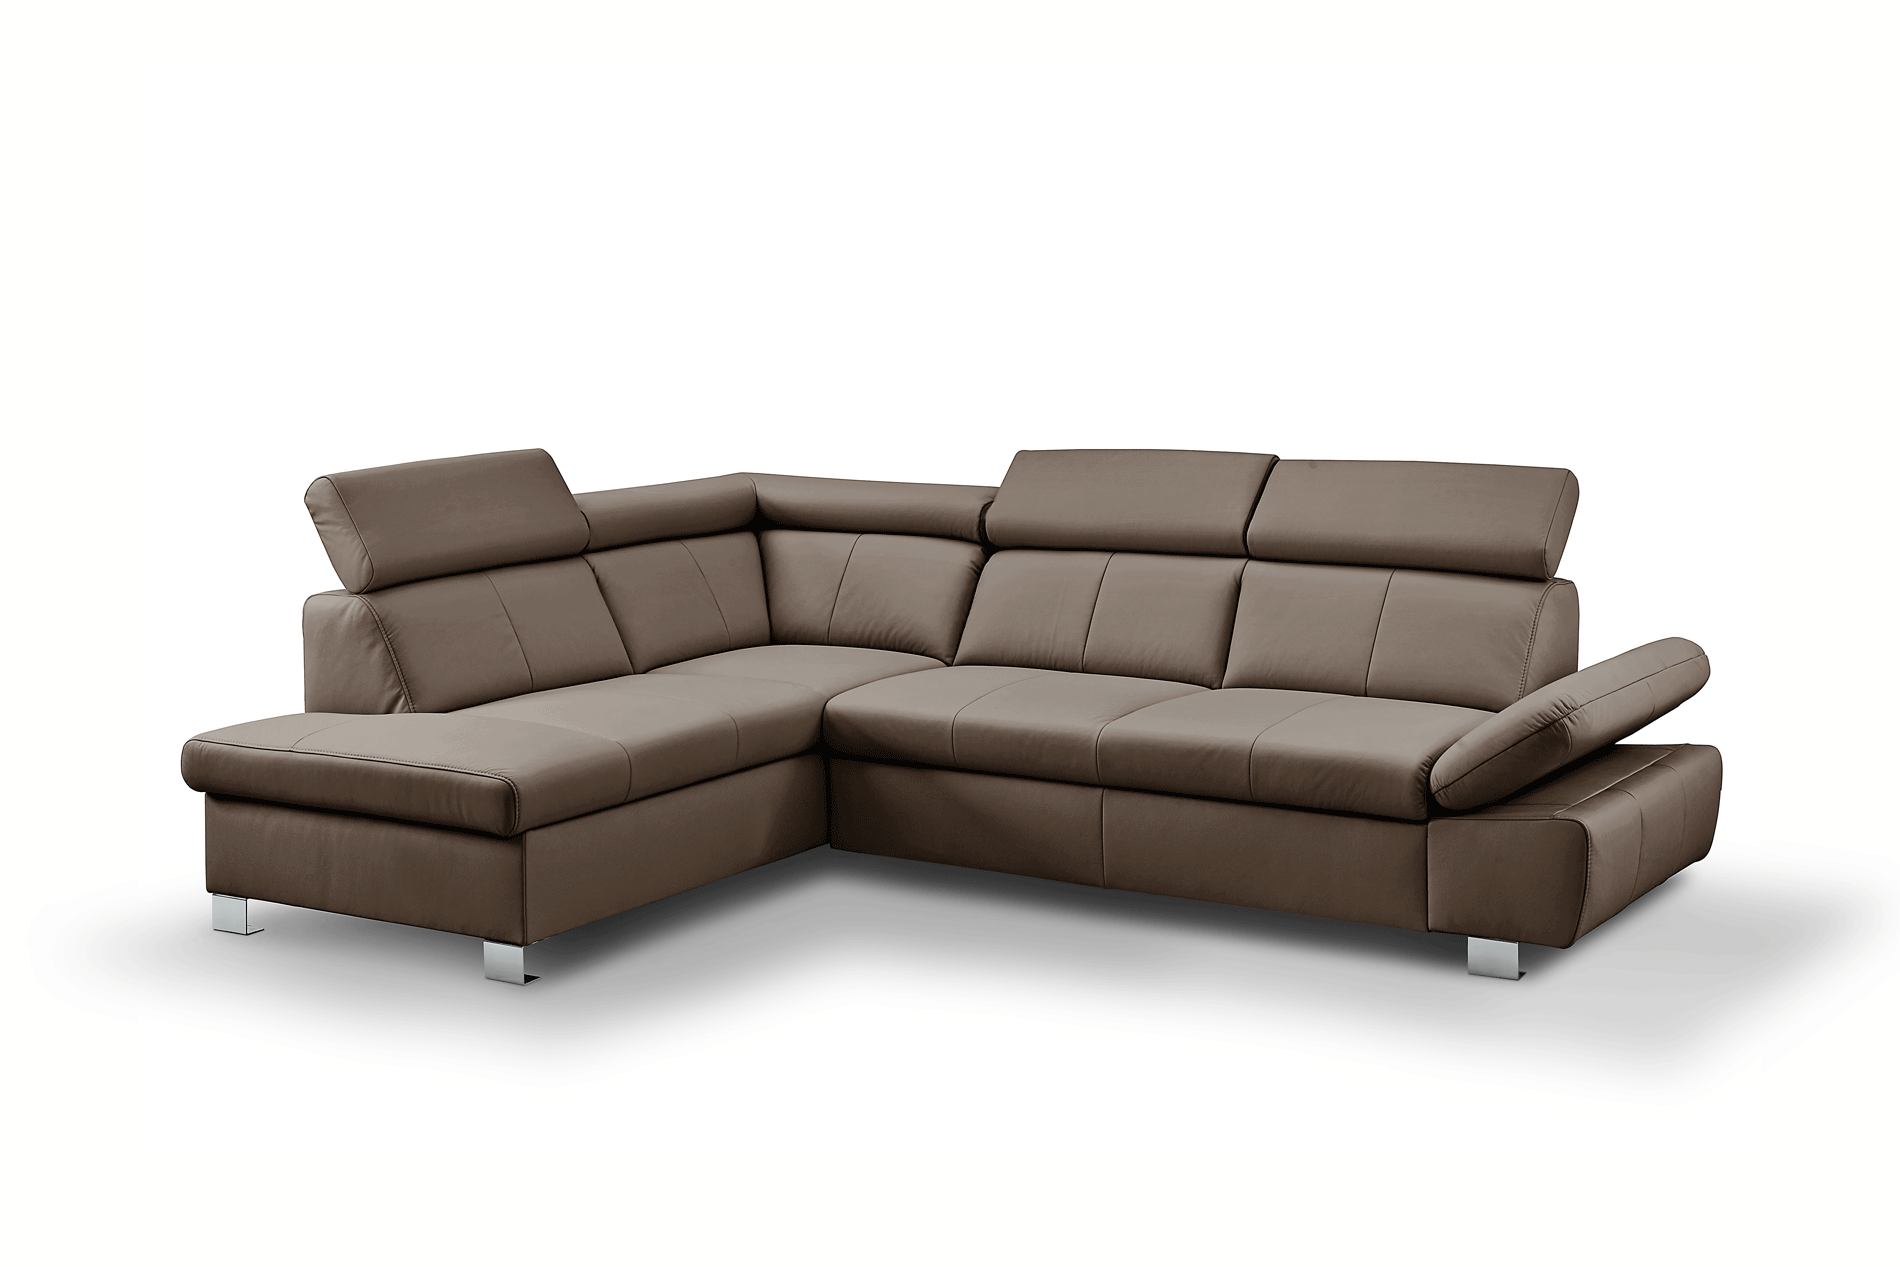 Living Room Furniture Sleepers Sofas Loveseats and Chairs Happy Sectional Leather